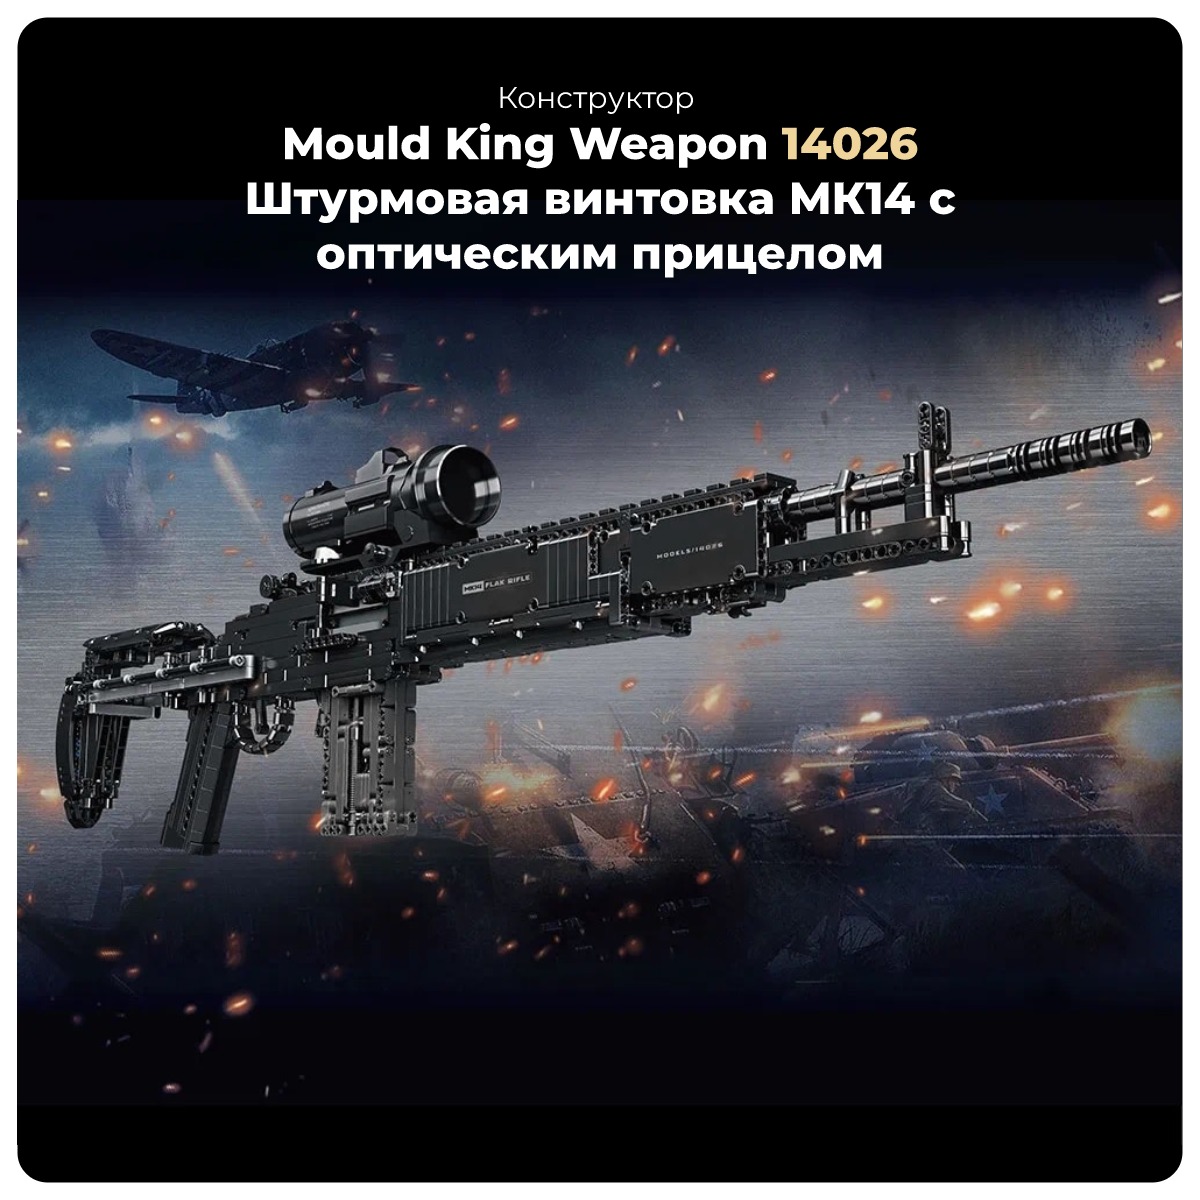 Mould-King-Weapon-14026-01